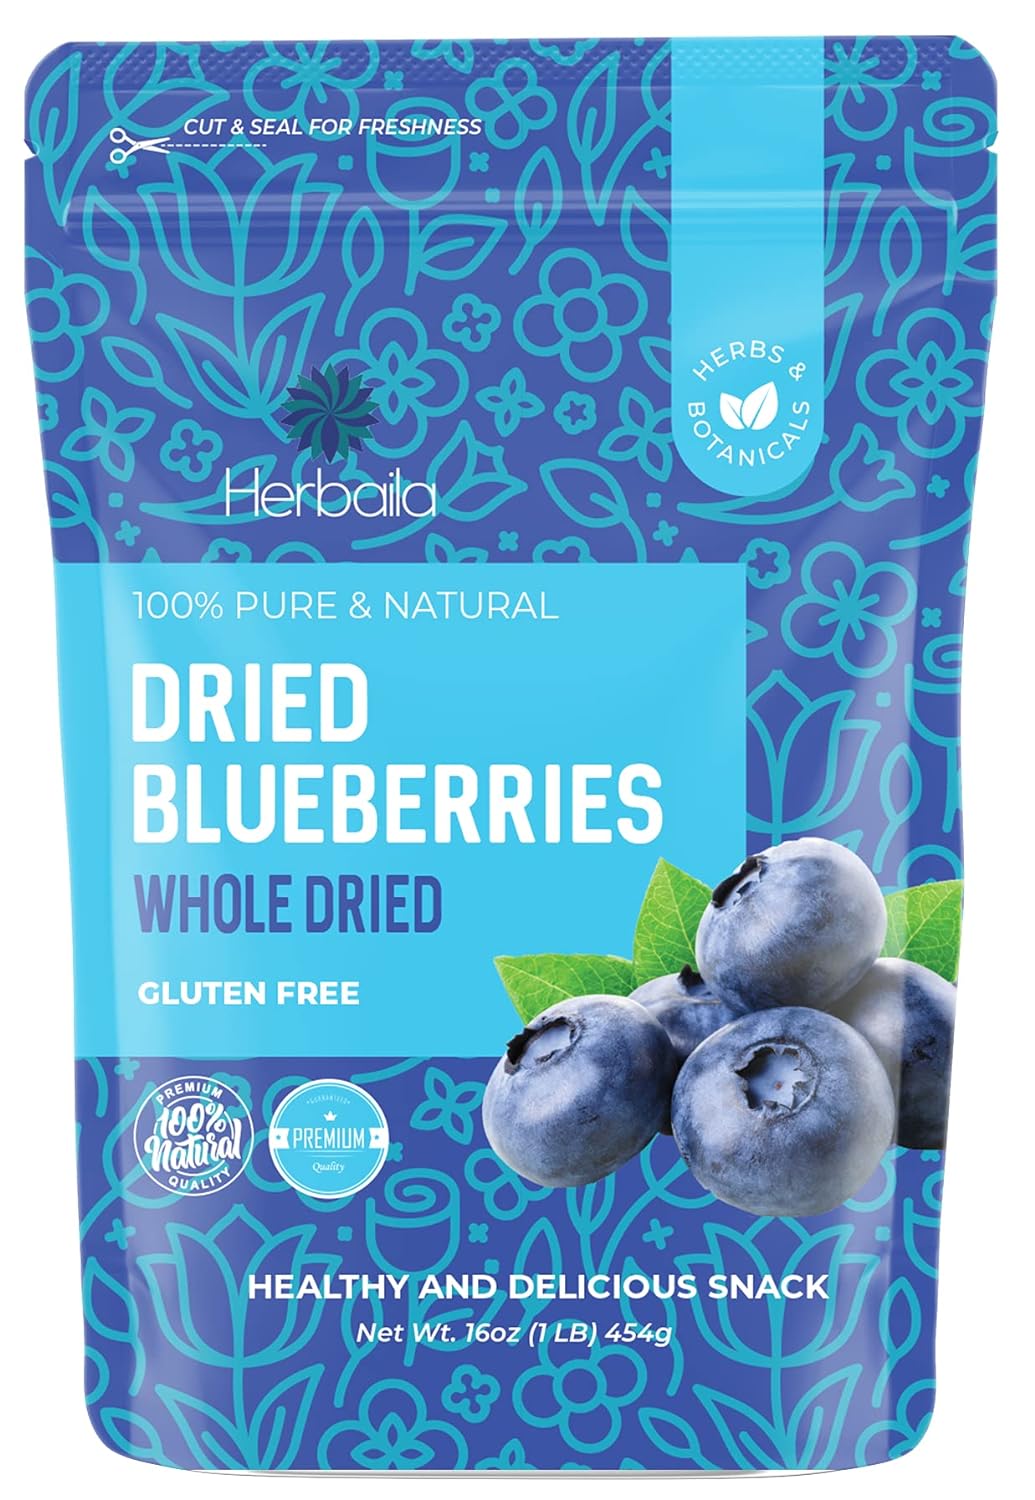 Herbaila Whole Dried Blueberries